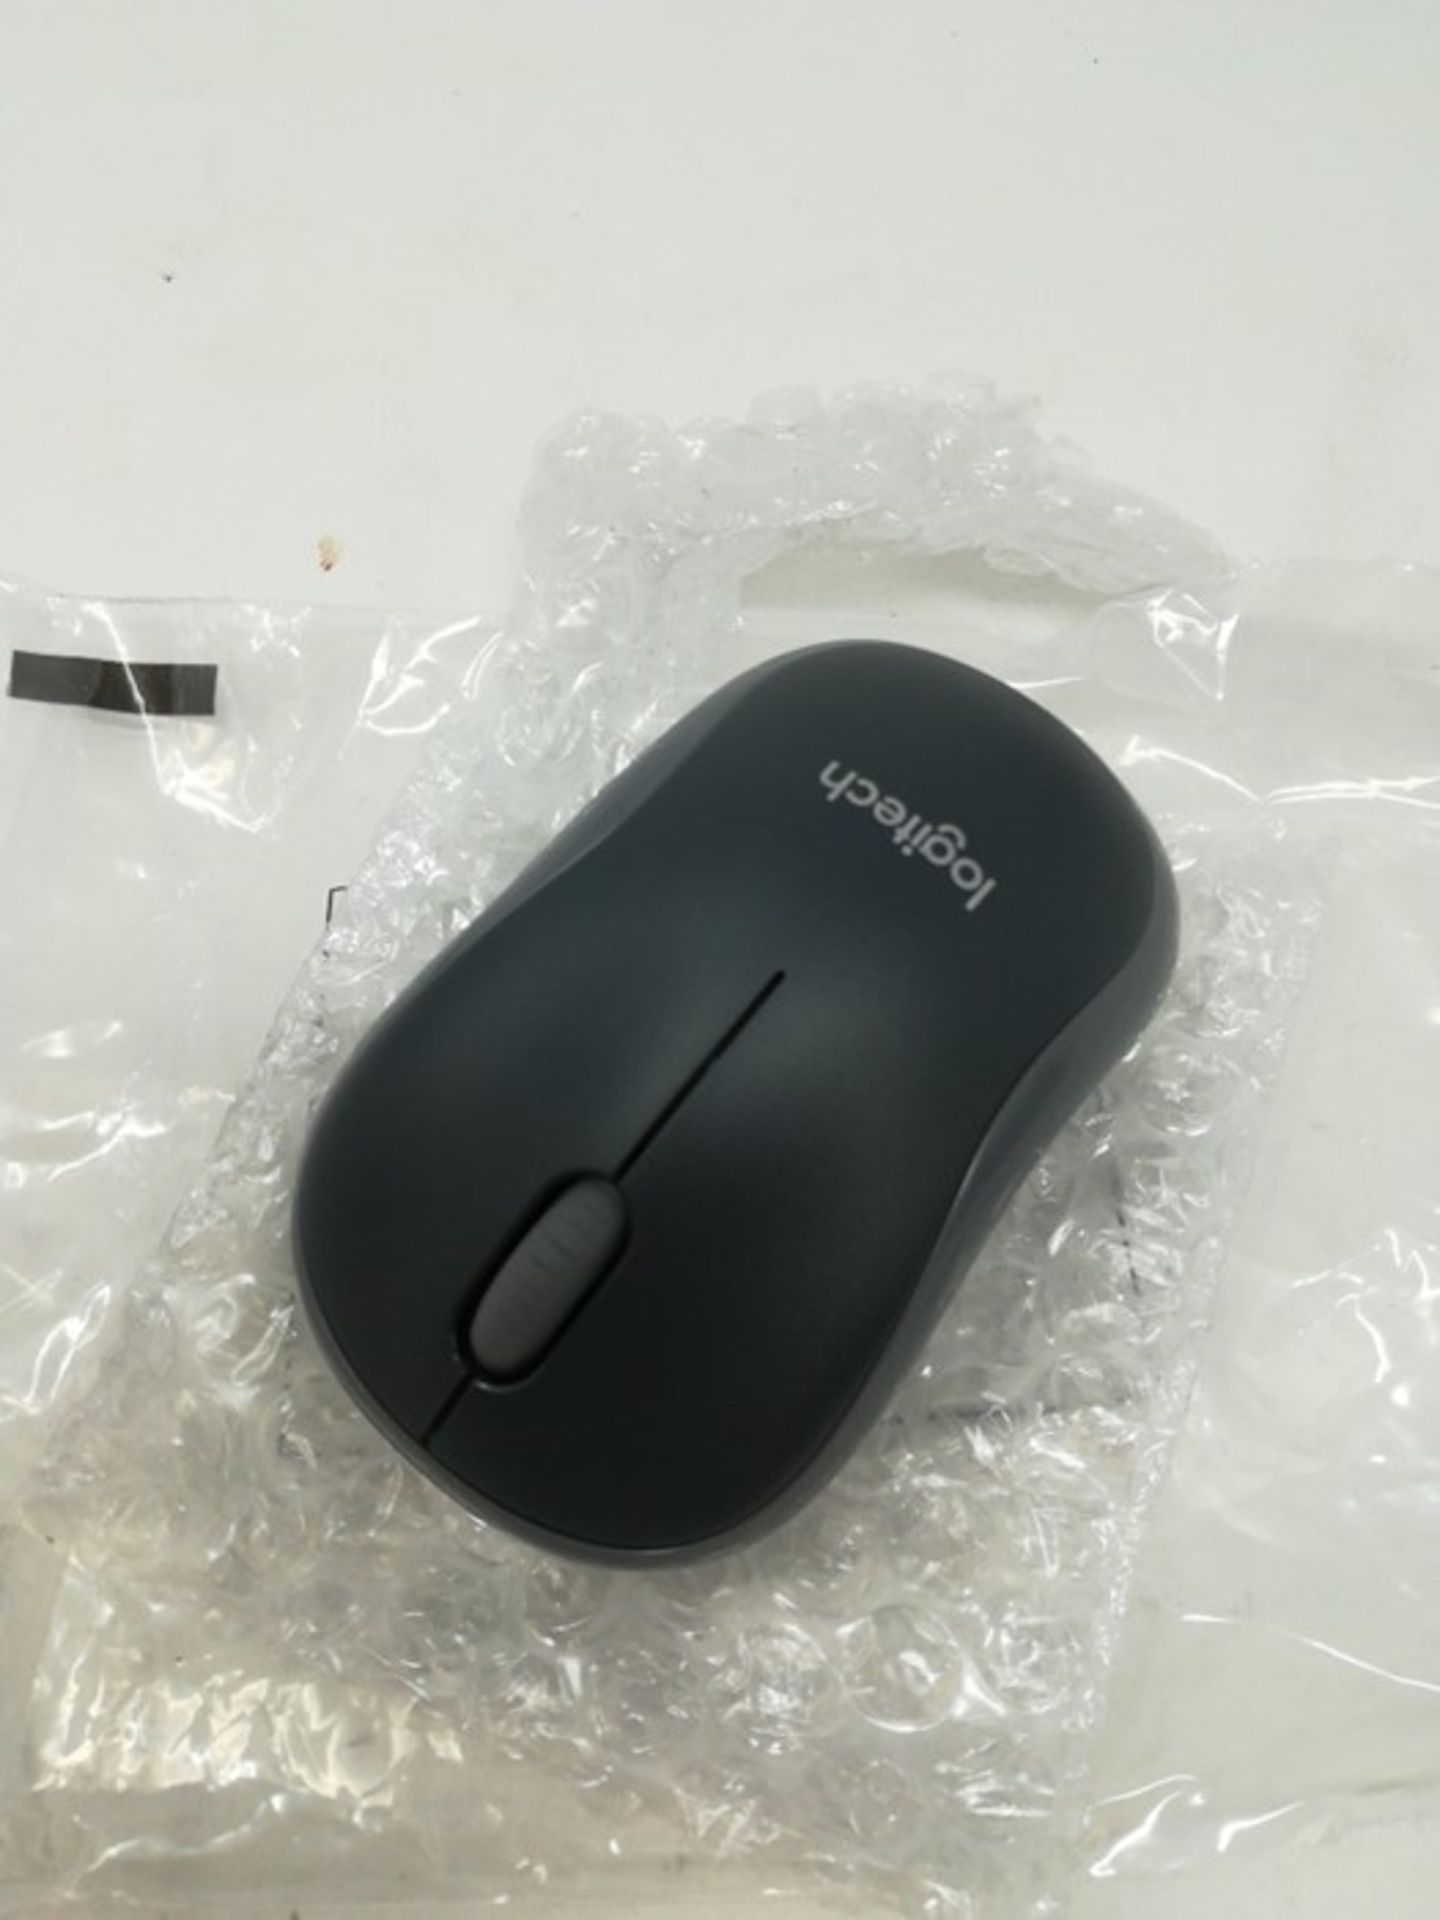 Logitech M185 Wireless Mouse, 2.4GHz with USB Mini Receiver, - Image 2 of 2